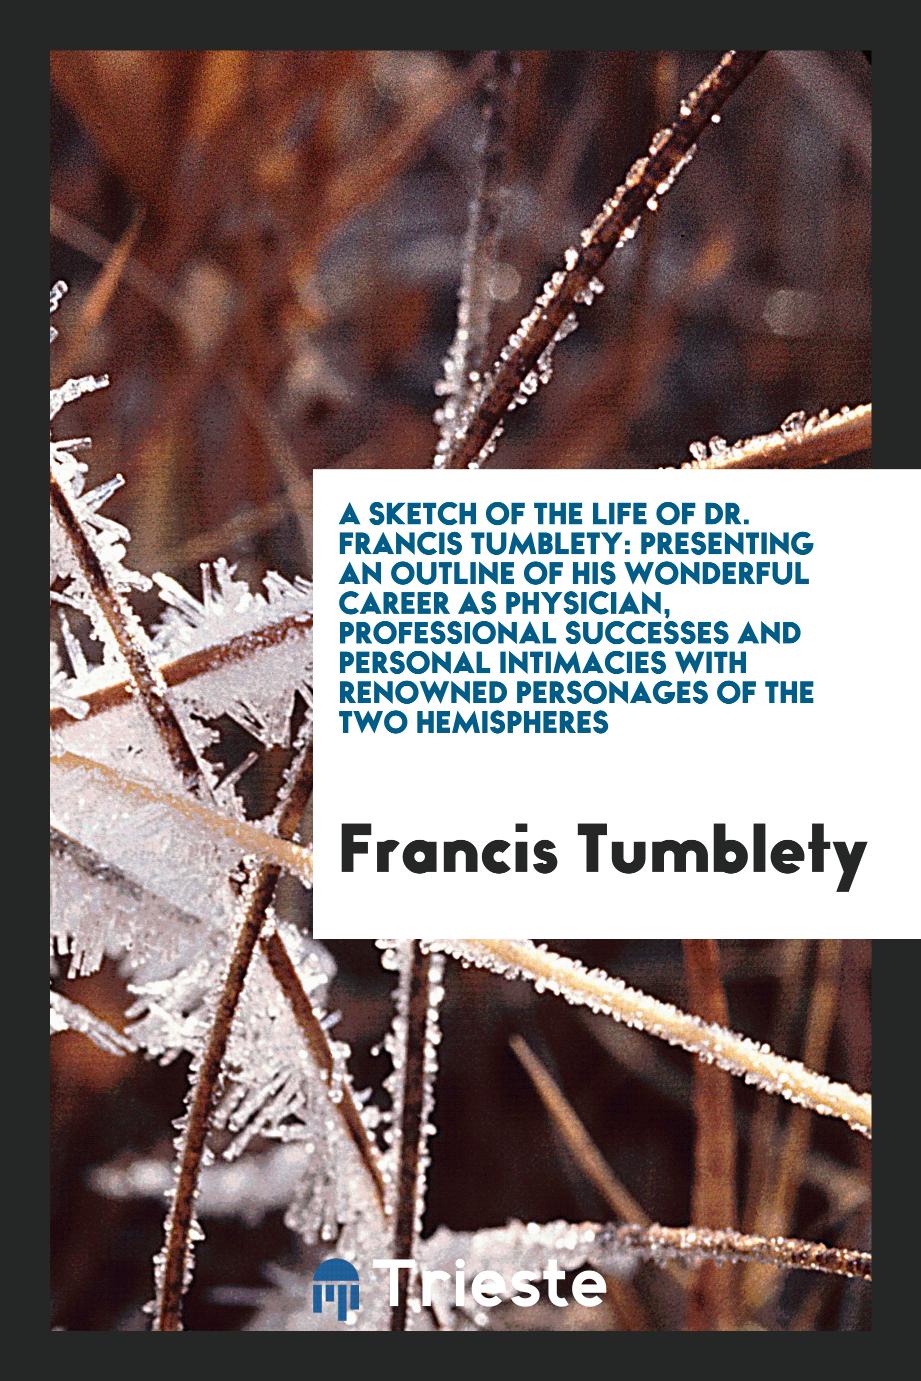 A Sketch of the Life of Dr. Francis Tumblety: Presenting an Outline of His Wonderful Career as Physician, Professional Successes and Personal Intimacies with Renowned Personages of the Two Hemispheres